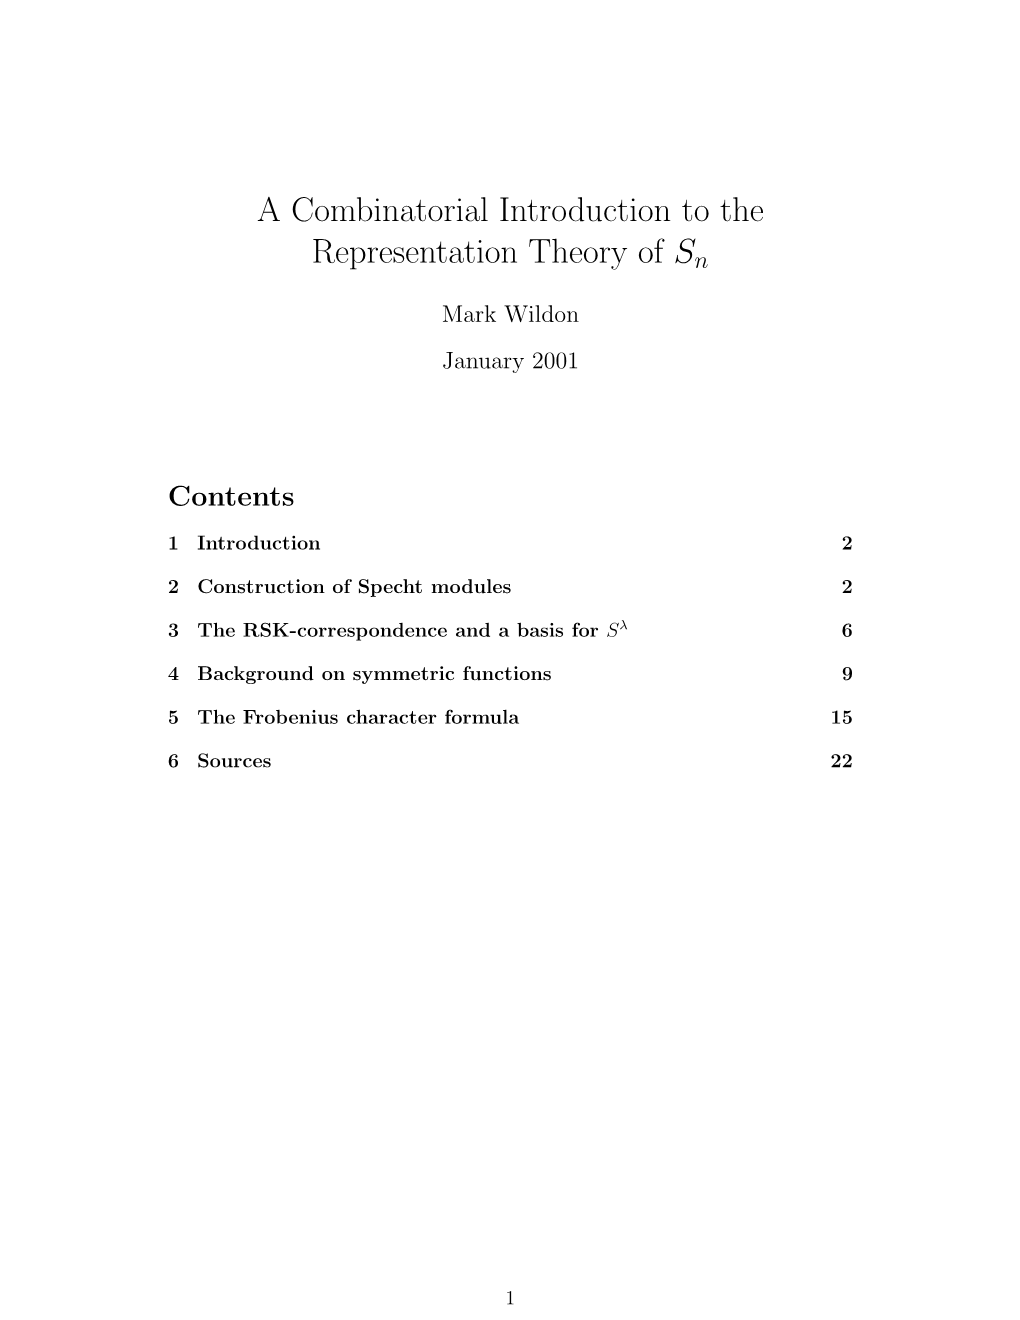 A Combinatorial Introduction to the Representation Theory of Sn